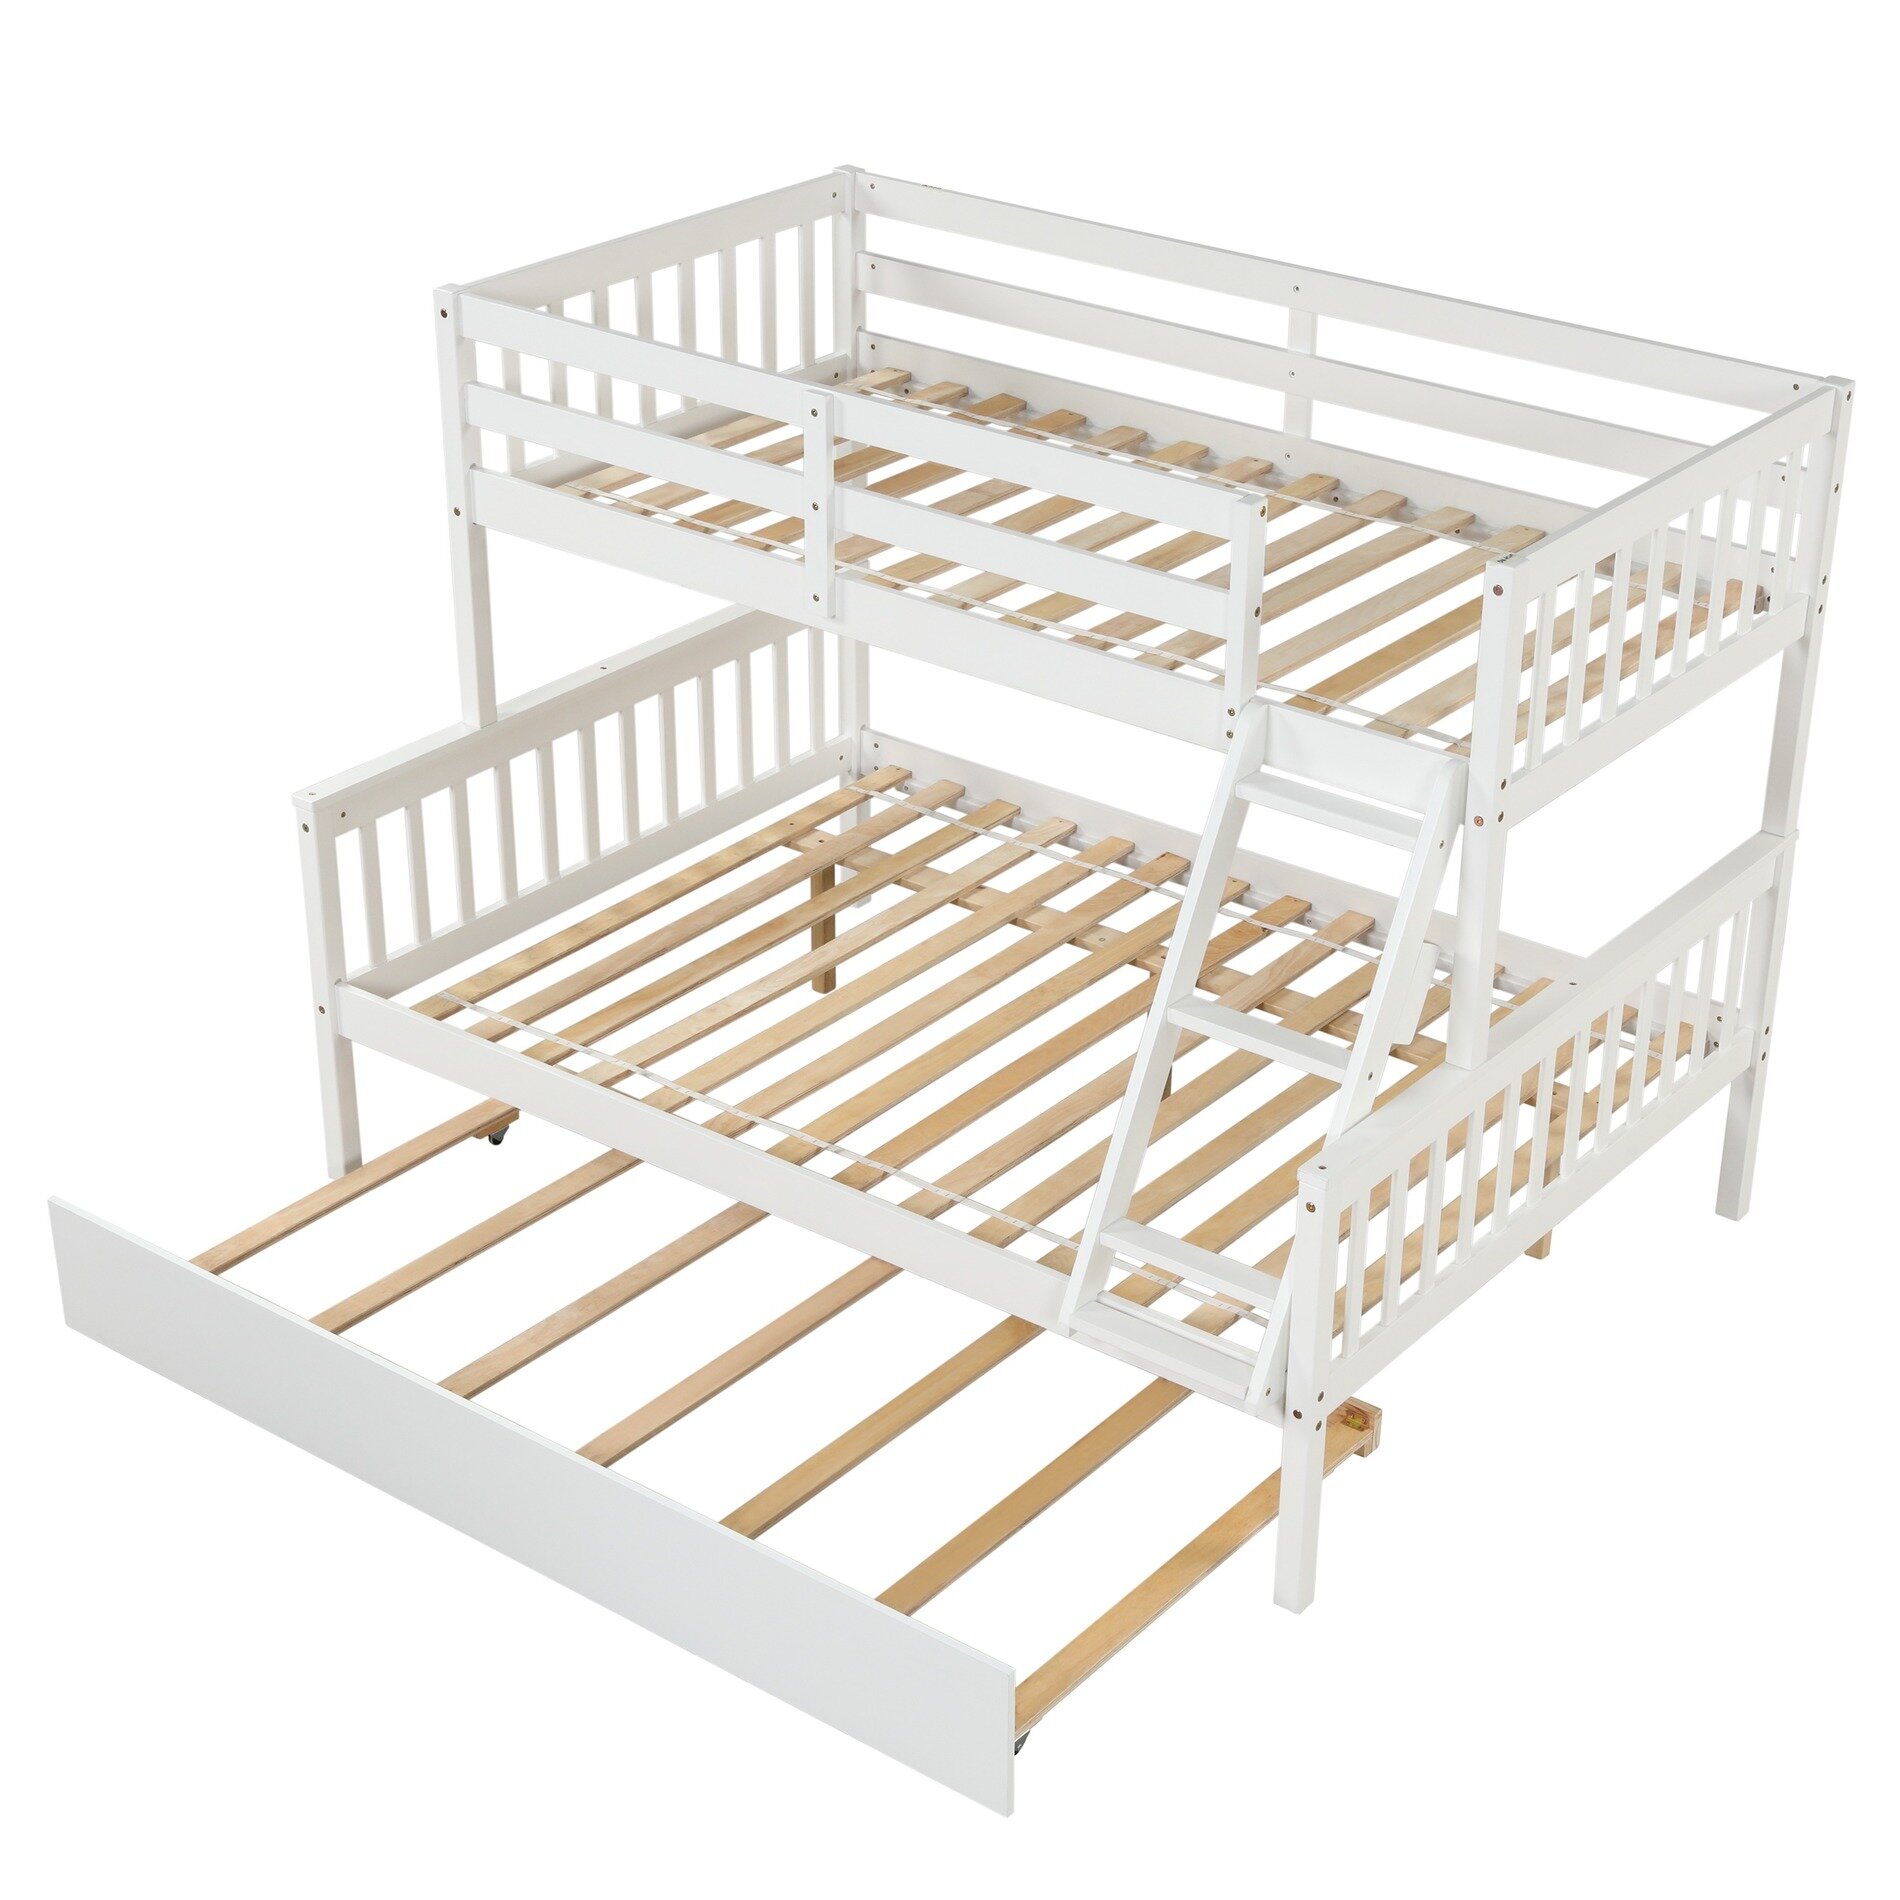 Details about   Metal Bunk Beds Twin Over Twin Bed Frame for Kids Teens Adults Bedroom Furniture 